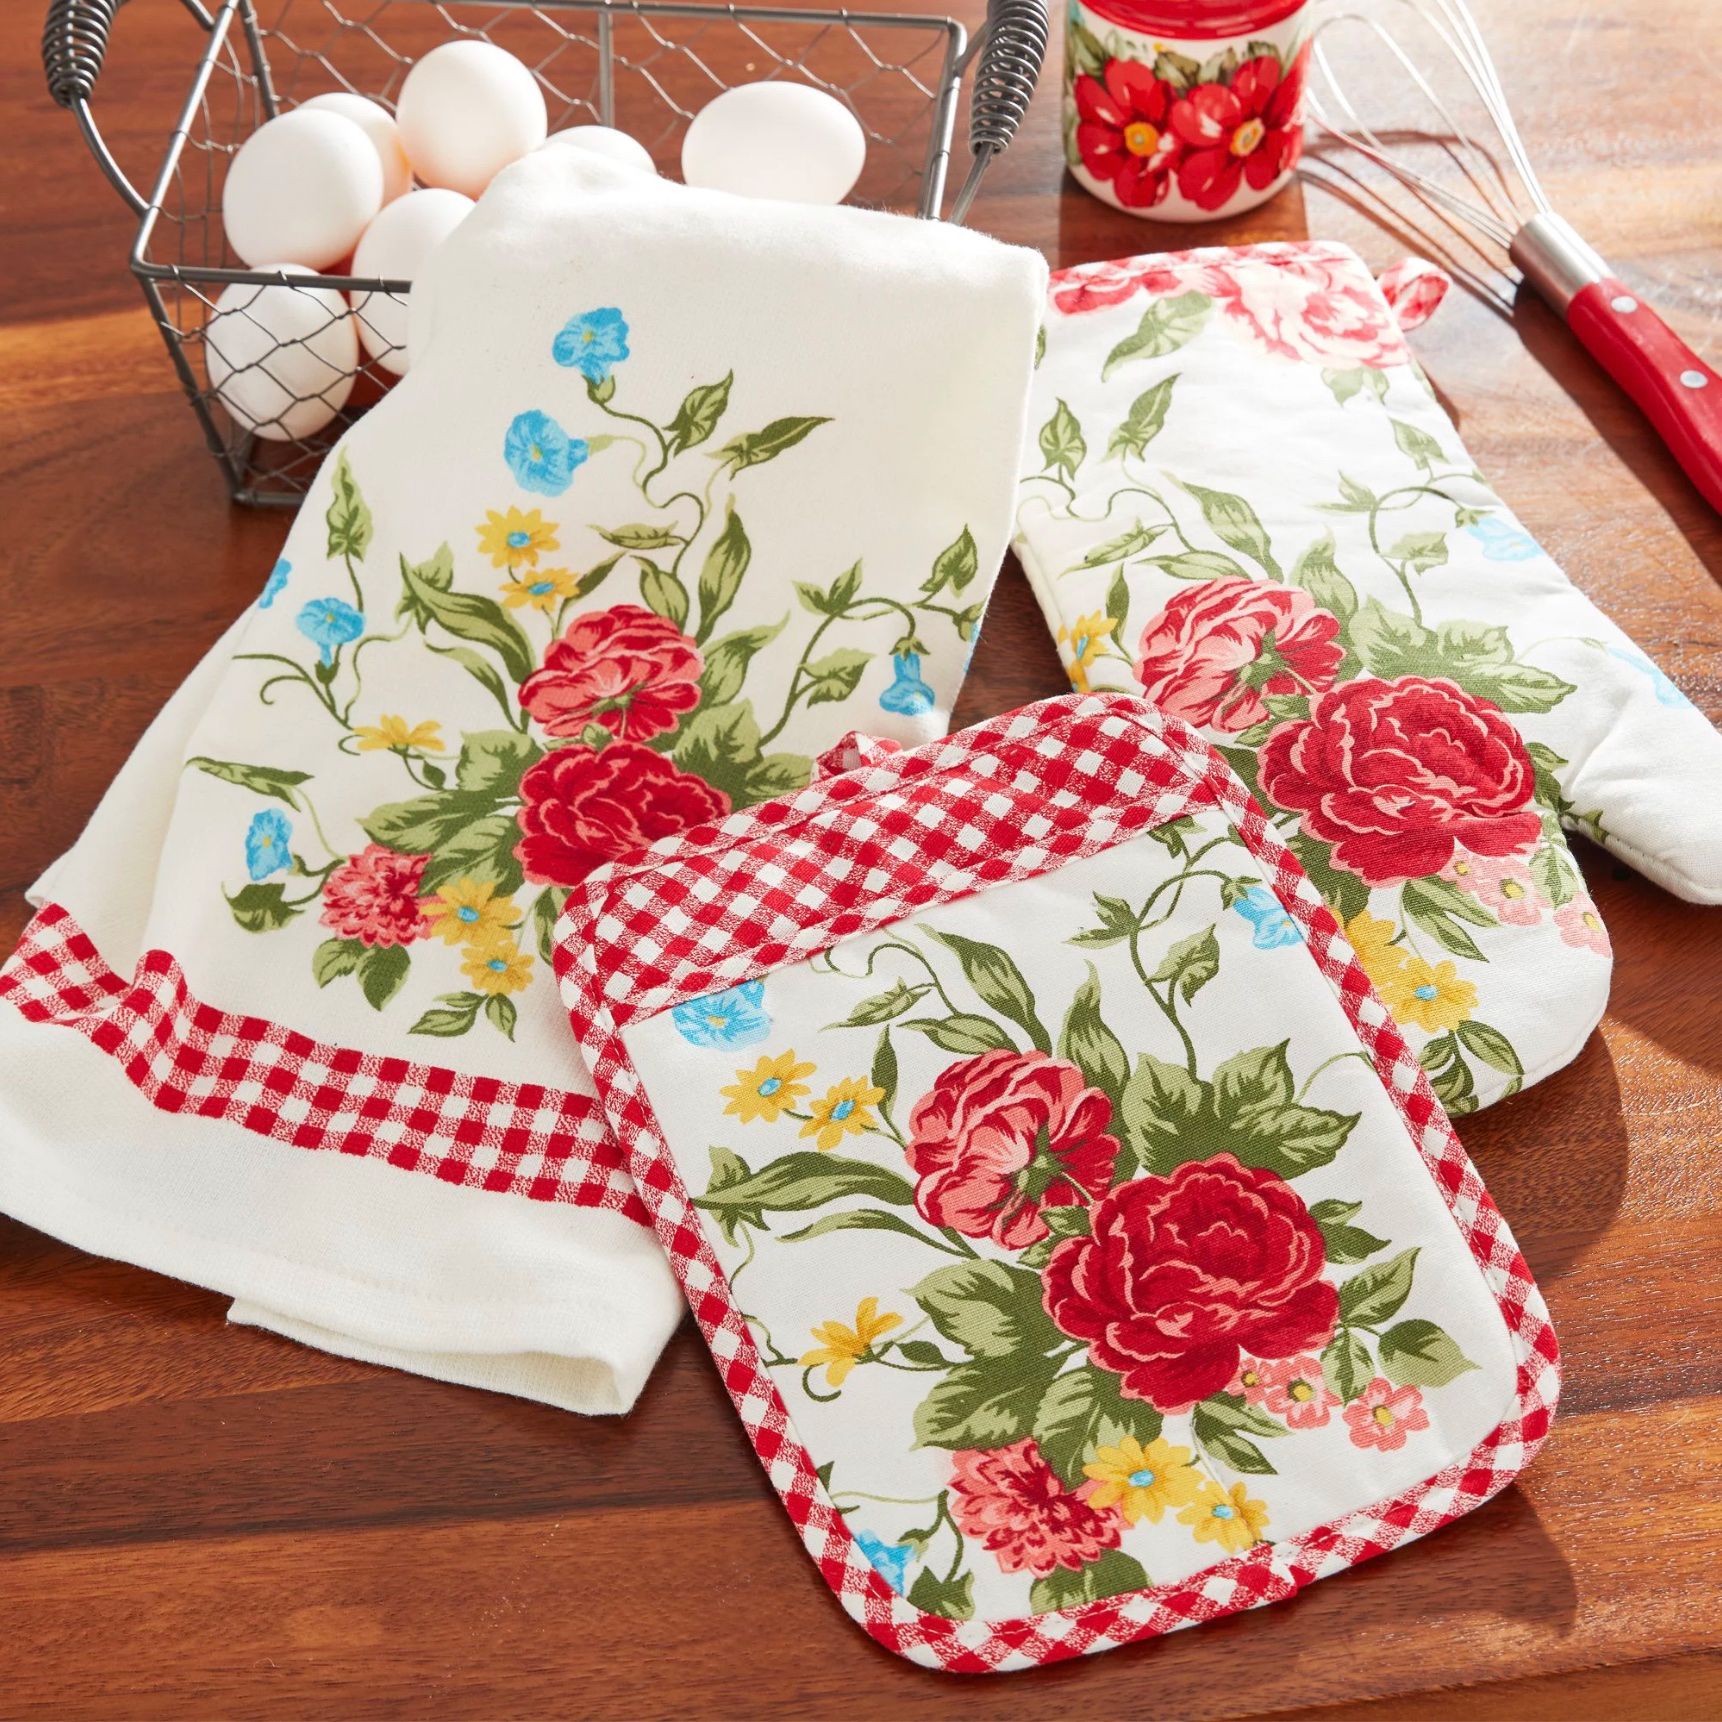 10 Best Oven Mitts in 2022 - Top Oven Gloves and Pot Holders